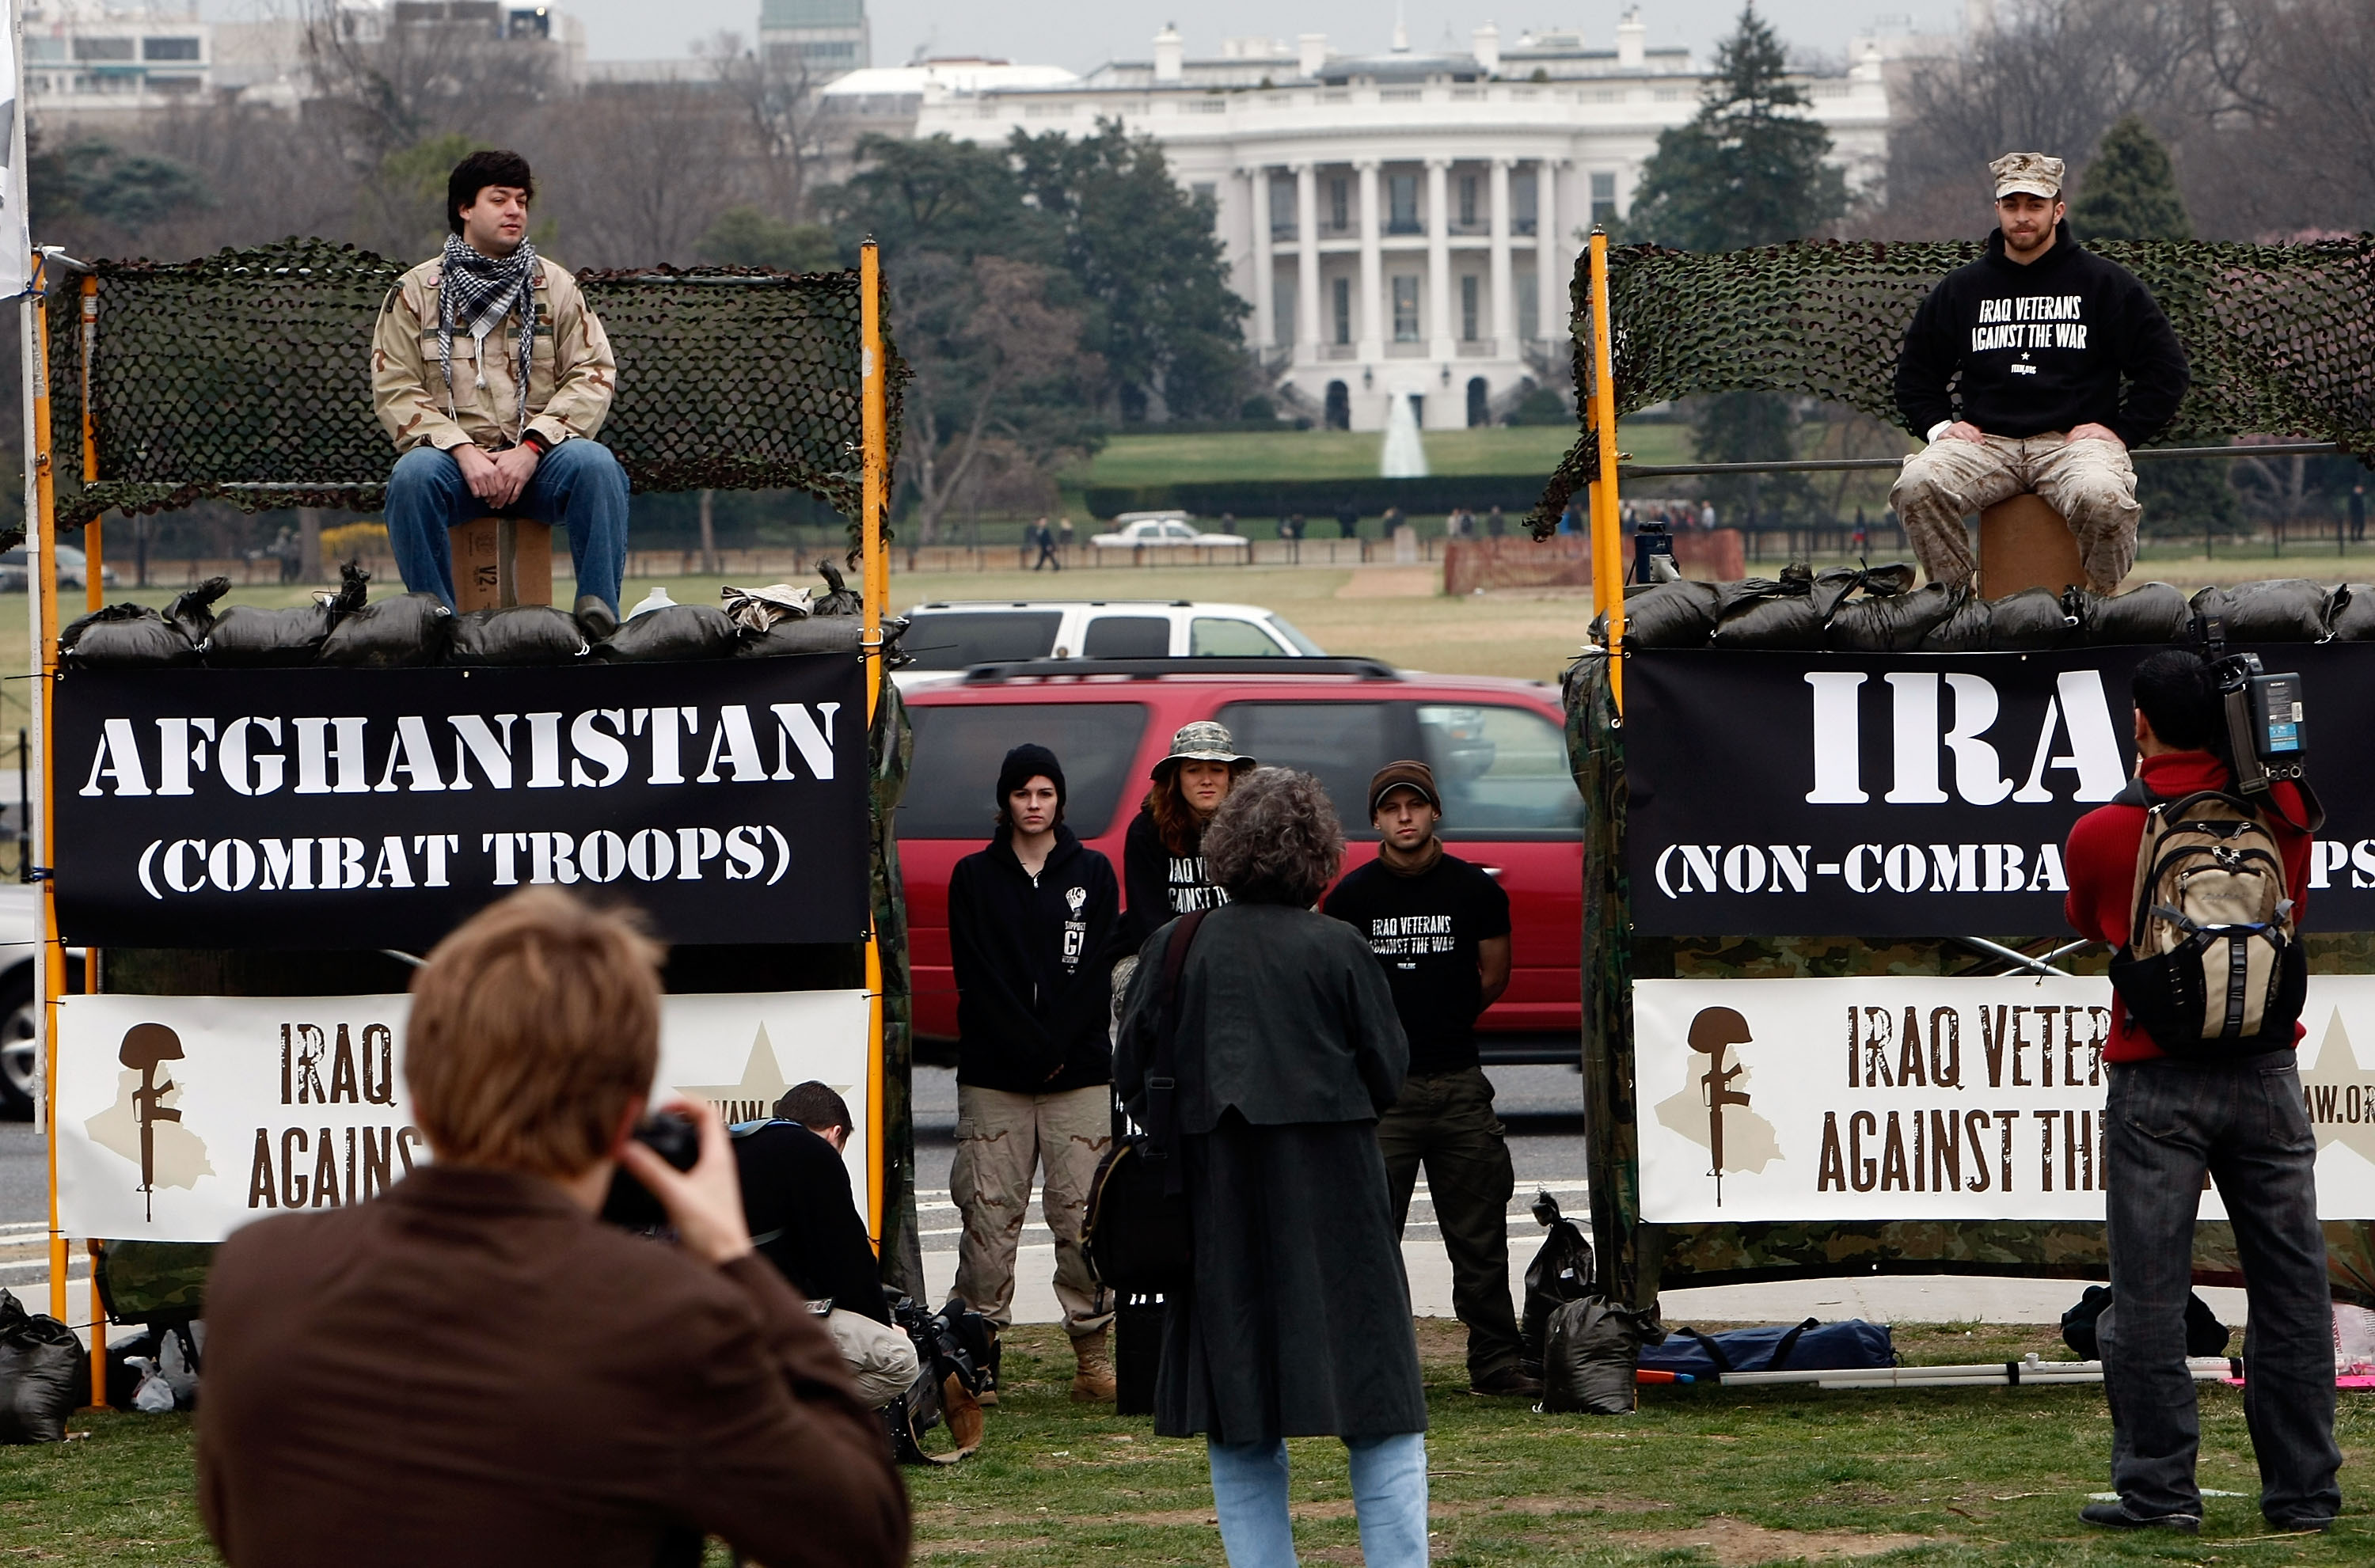 Win McNamee/Getty Images. Washington DC.Veterans of the wars in Iraq and Afghanistan protest outside the White House March 19, 2009 in Washington, DC. The veterans protested against 'President Obama's deceptions about his foreign policy,' and to mark the sixth anniversary of the Iraq war.